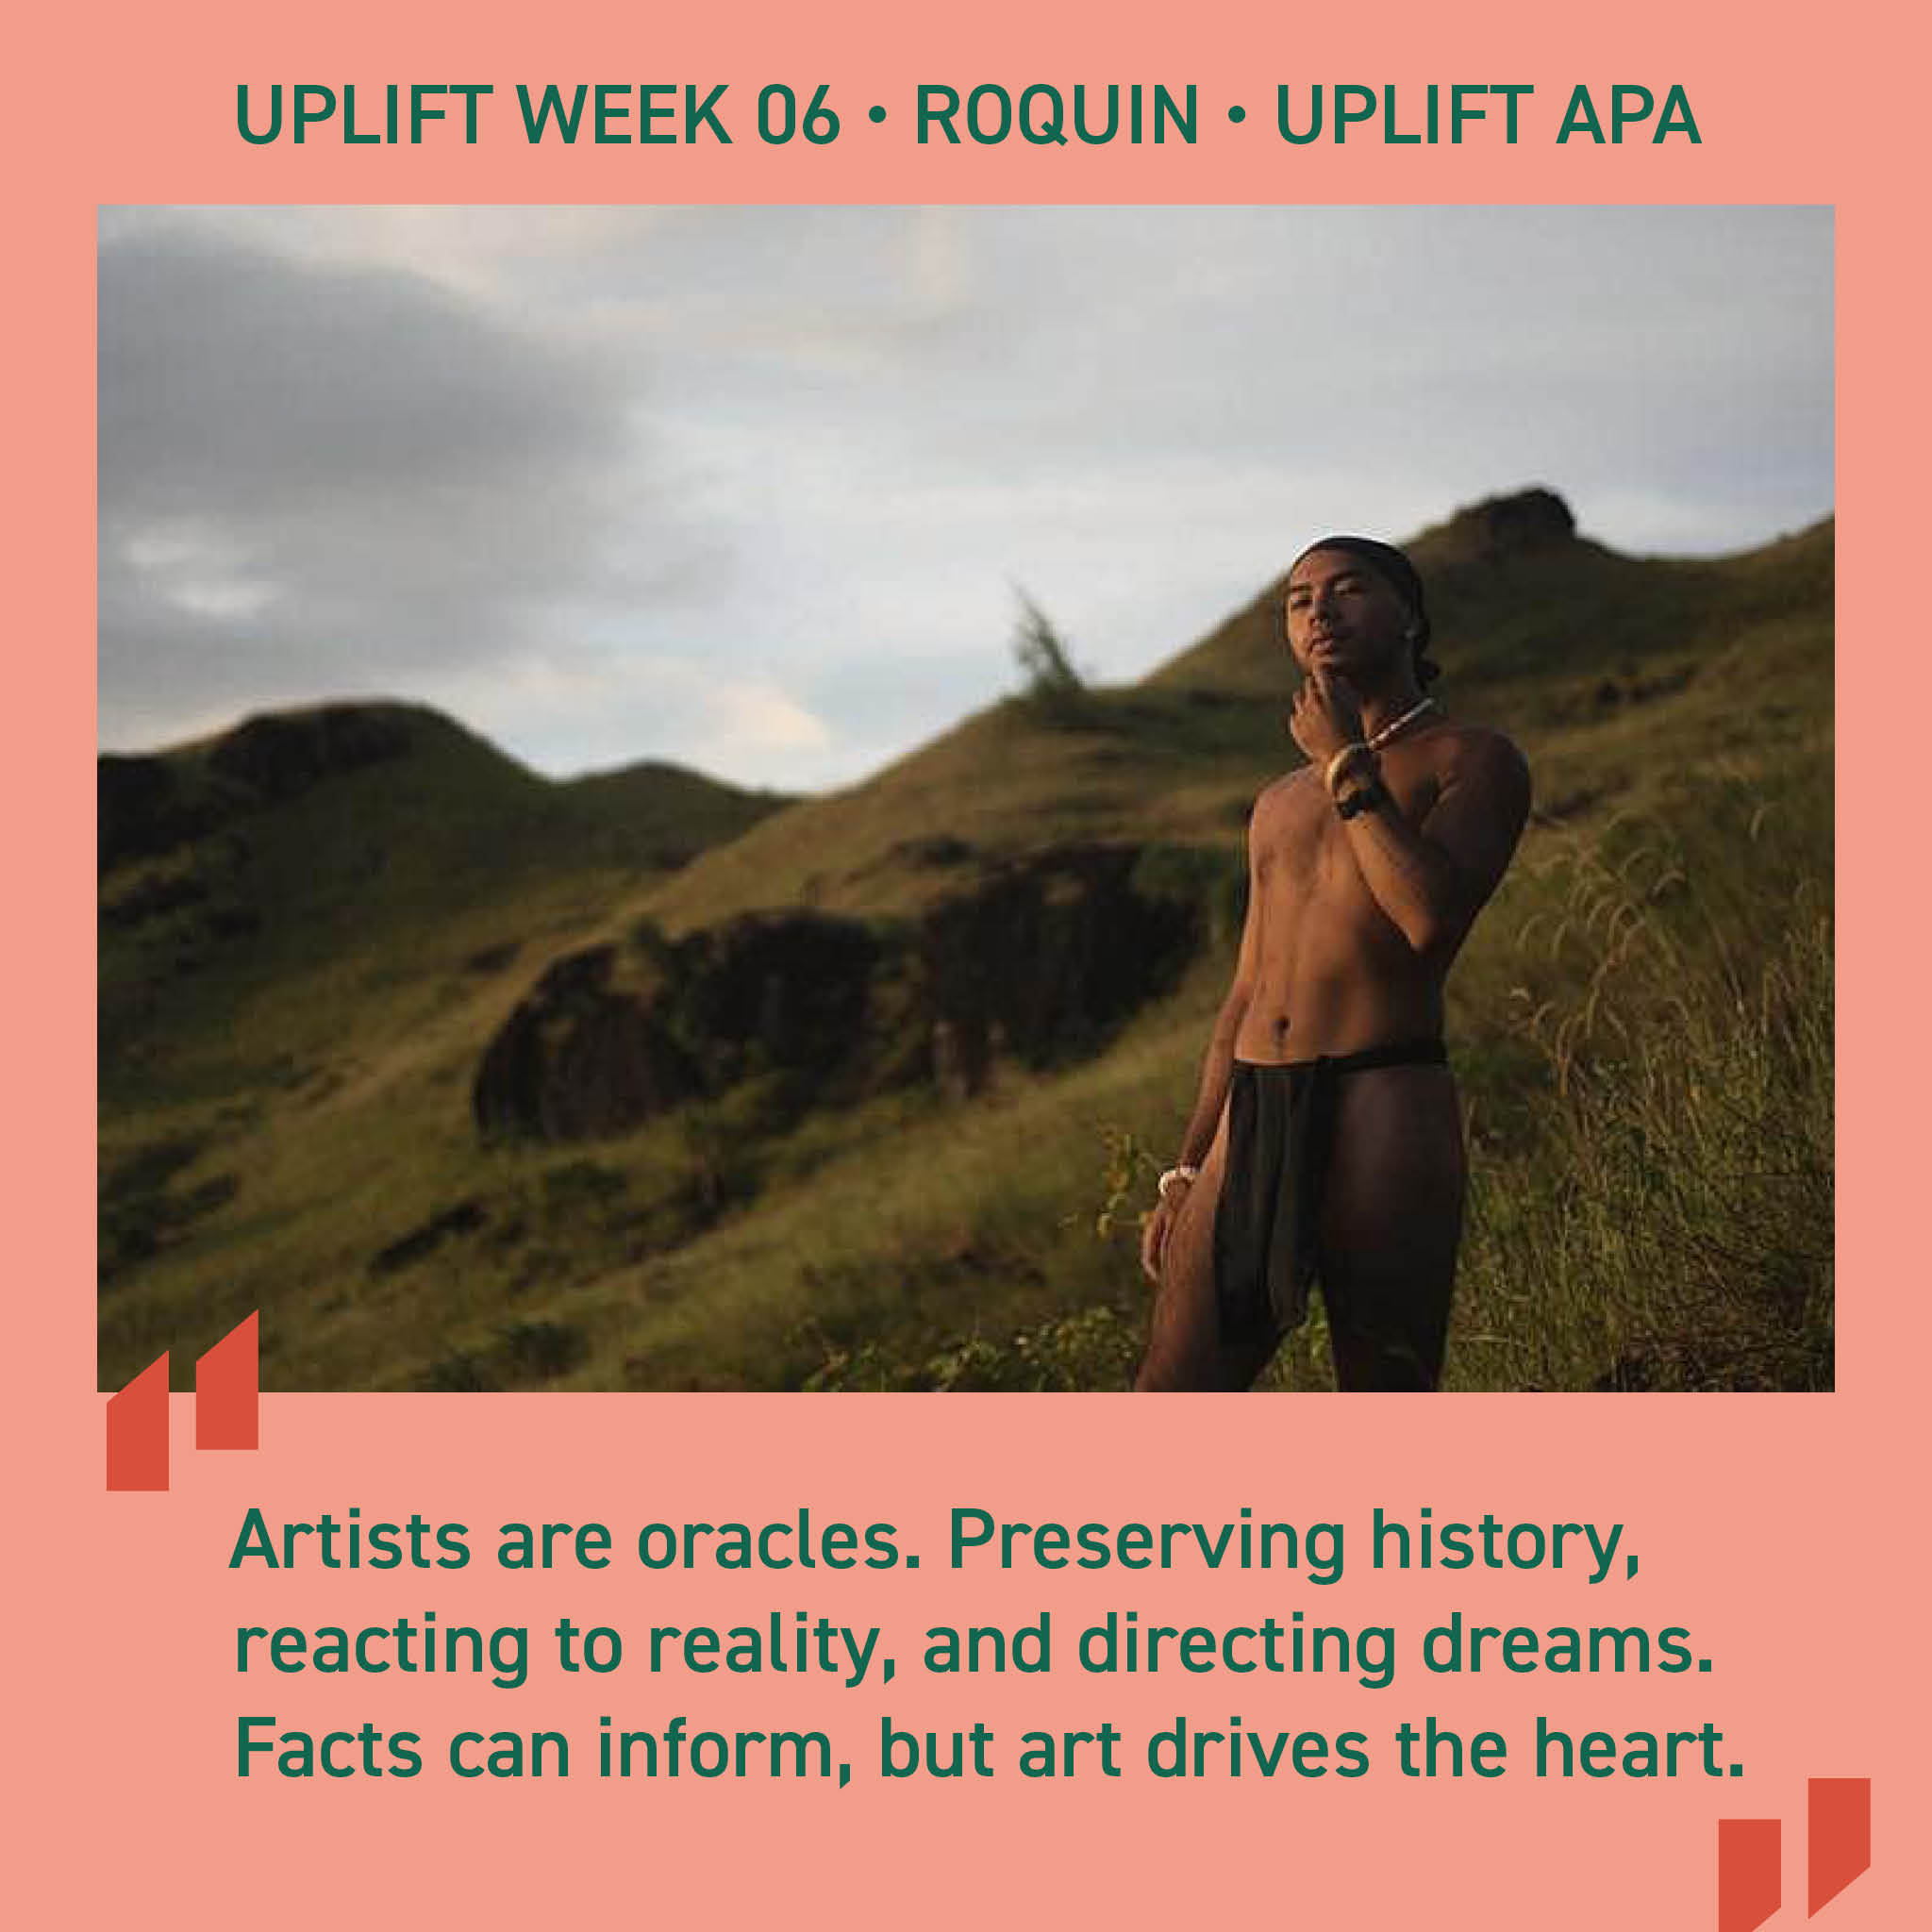 Example of an Instagram post on the UPLIFT page featuring a quote by an APA artist.